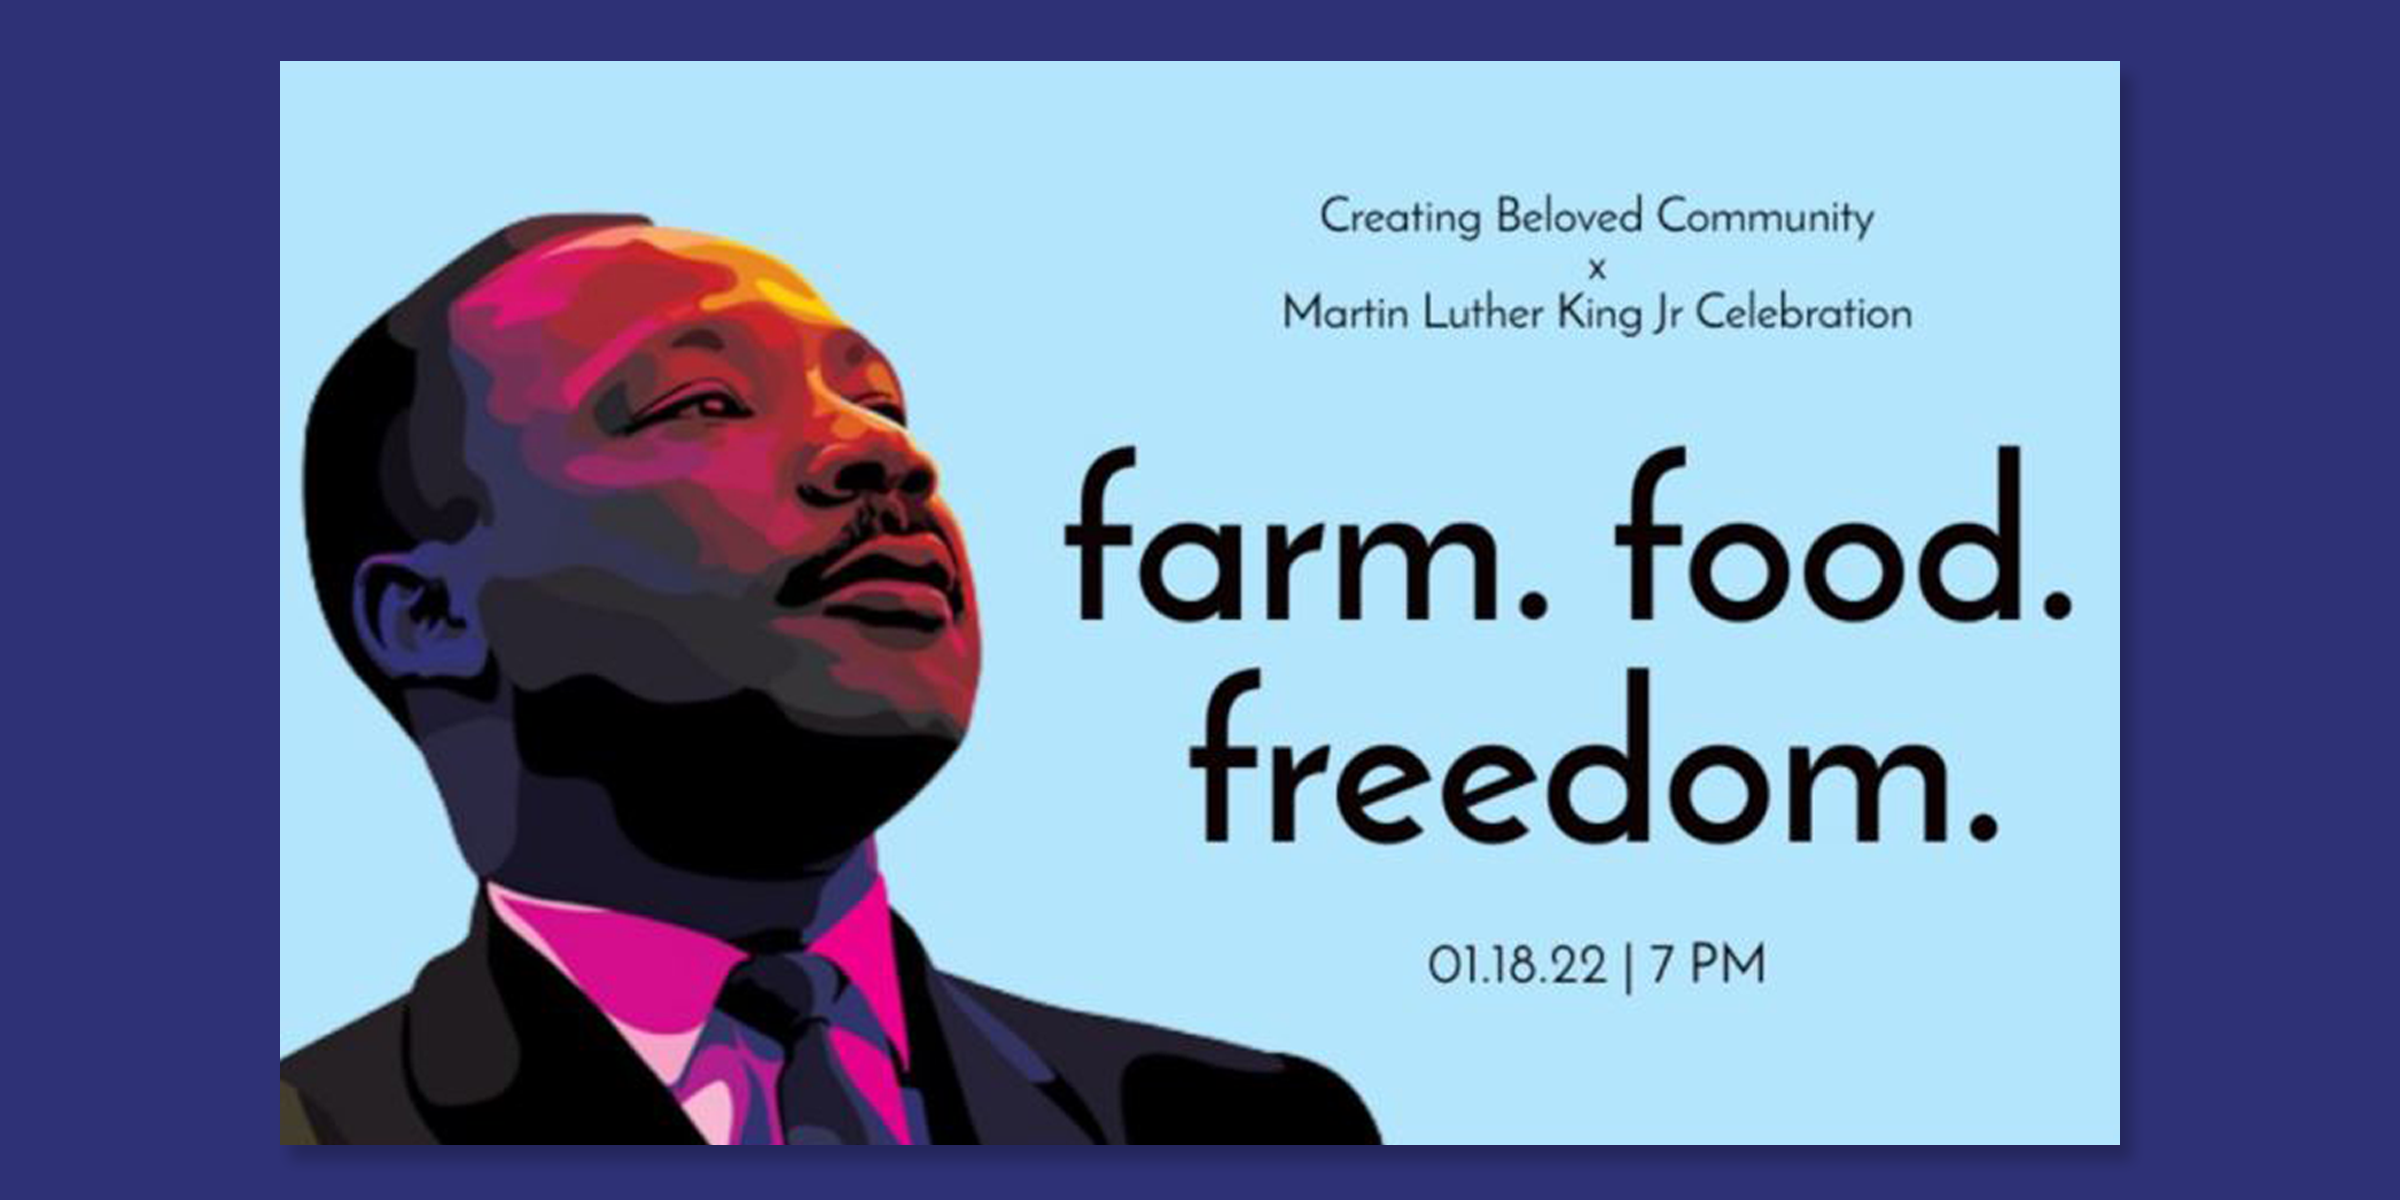 Graphic of Rev. Dr. Martin Luther King, Jr. Text on top reads: Creating Beloved Community, Martin Luther King, Jr. Celebration. Text in center reads: farm. food. freedom. Text at bottom reads: 01.18.22 7p.m.